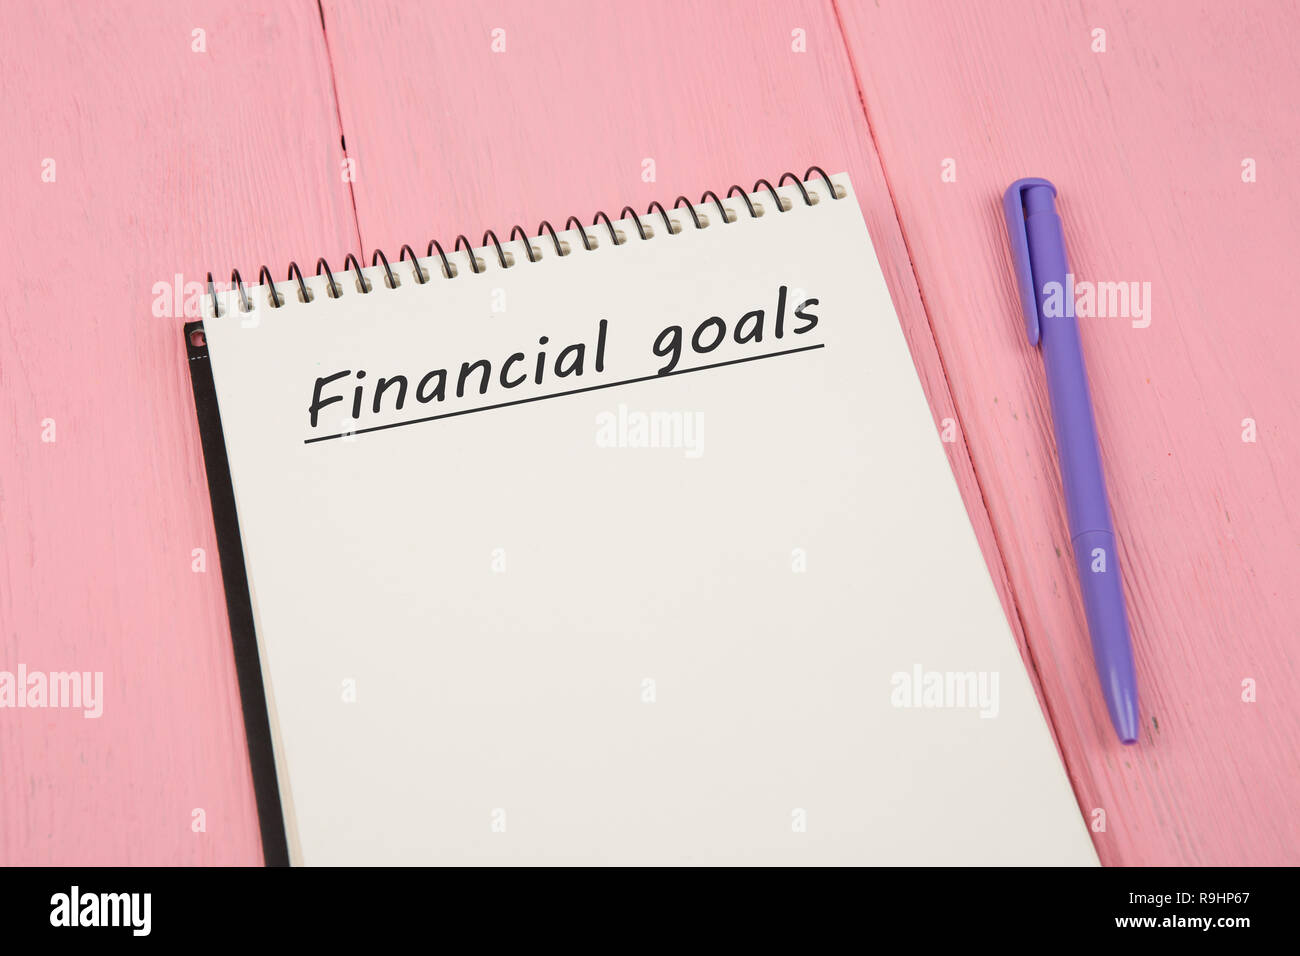 Notepad with text 'Financial goals' and pen on pink wooden table Stock Photo